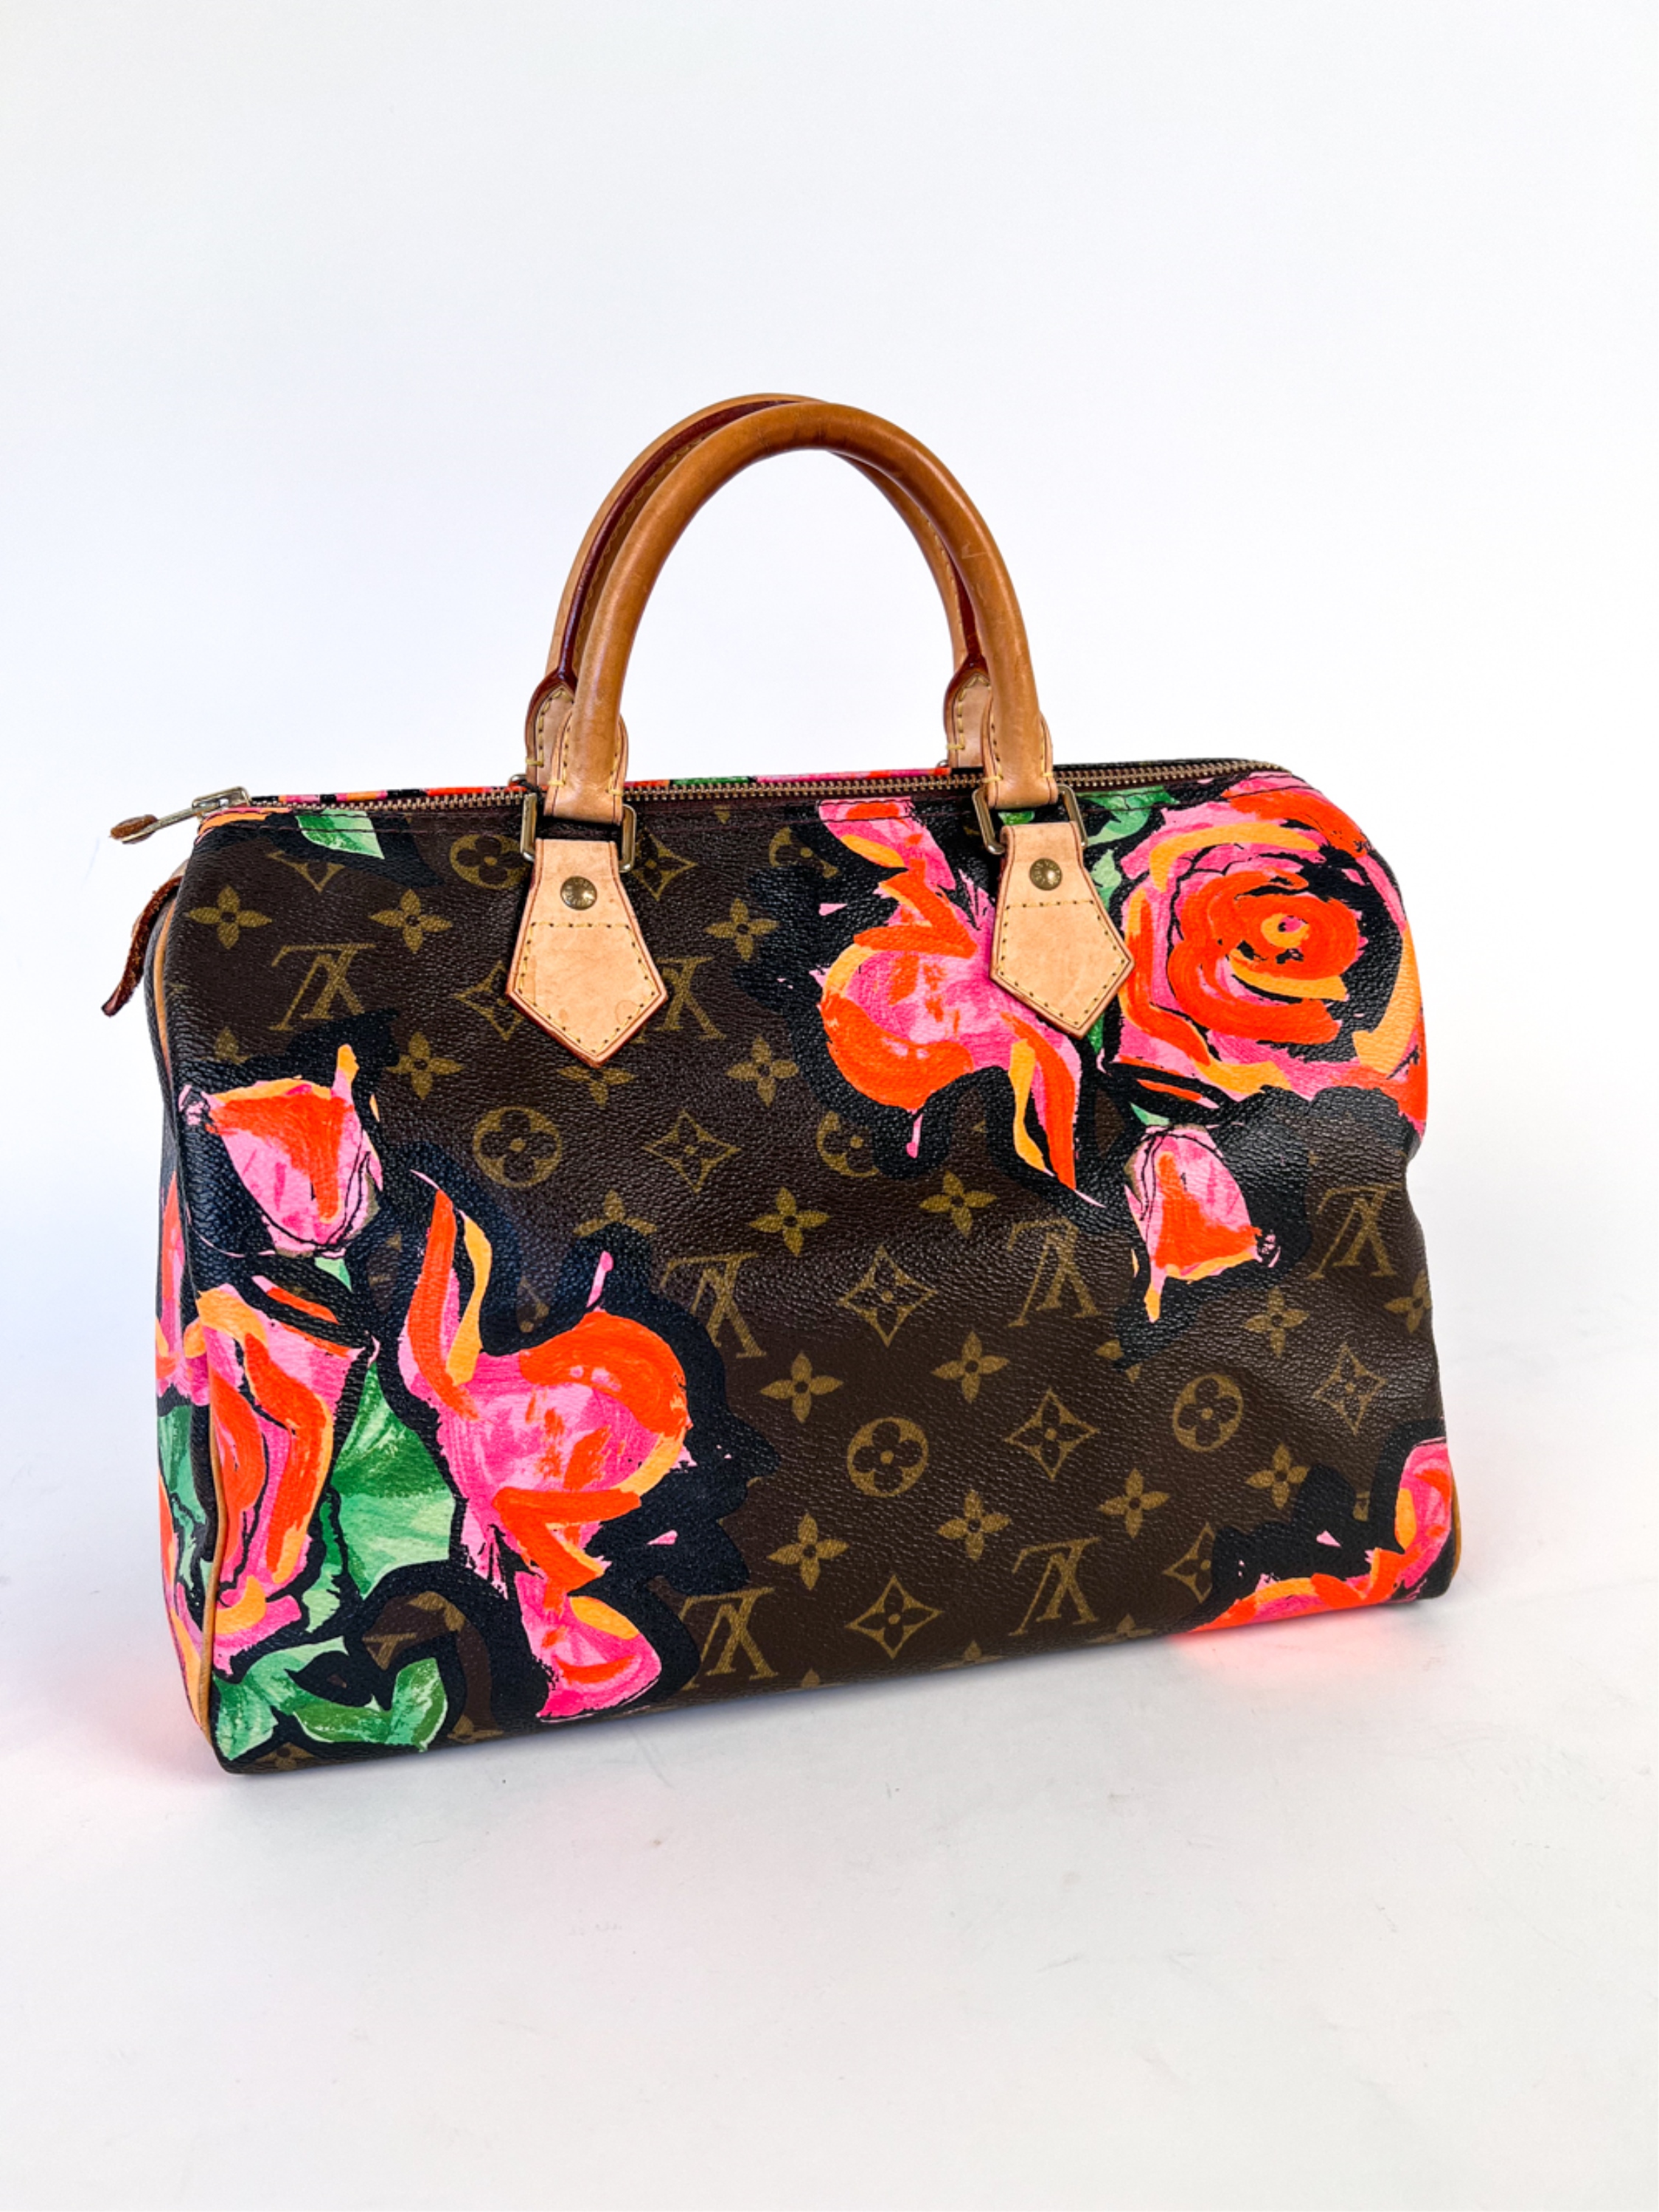 Louis Vuitton Stephen Sprouse Multicolor Monogram Roses Coated